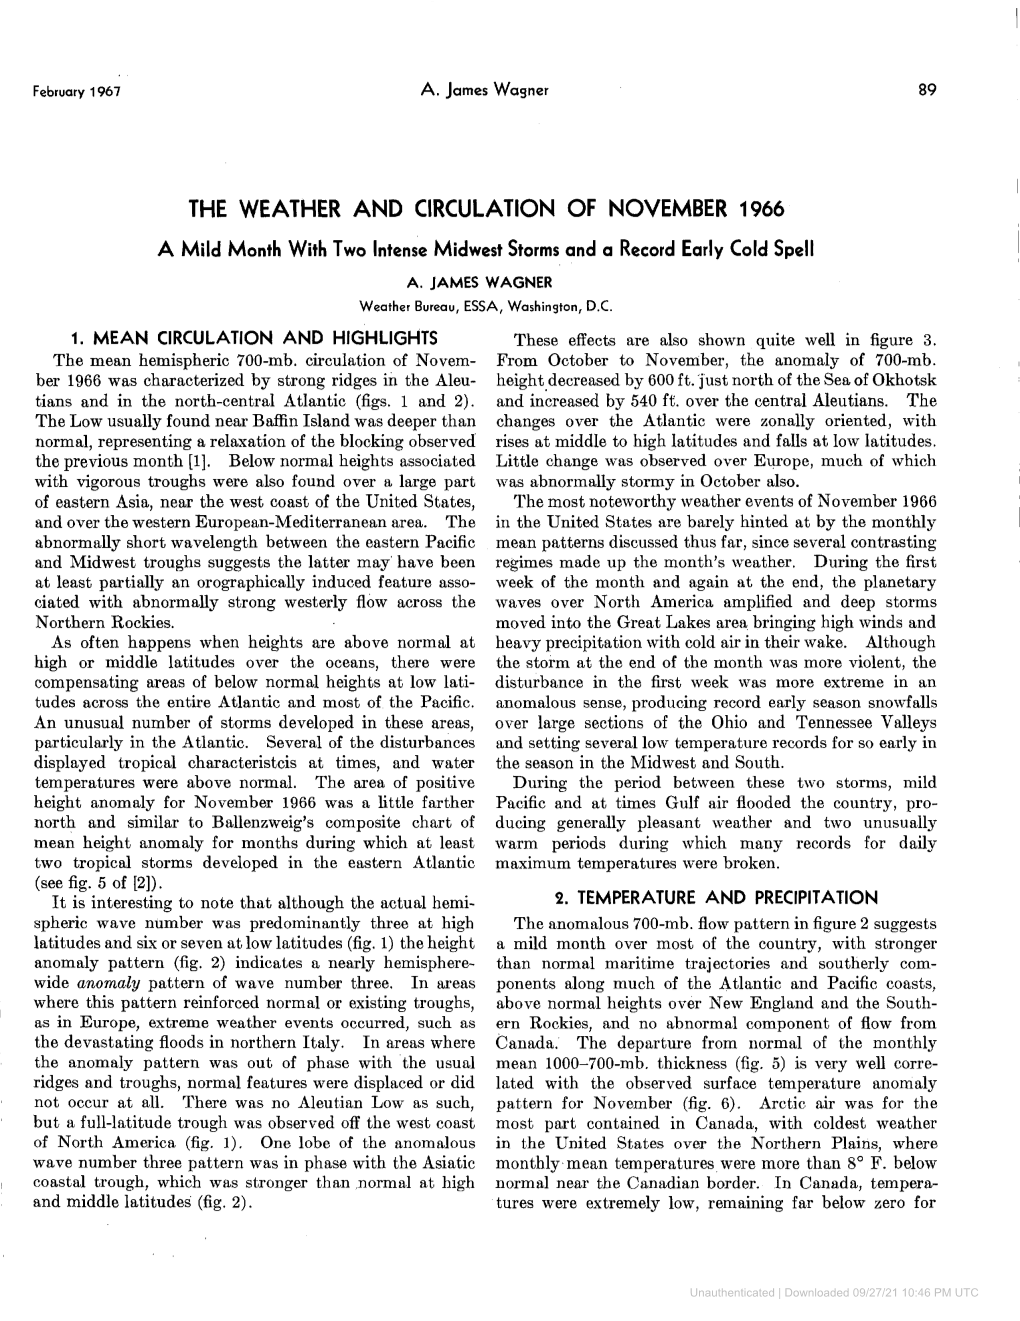 The Weather and Circulation of November 1966